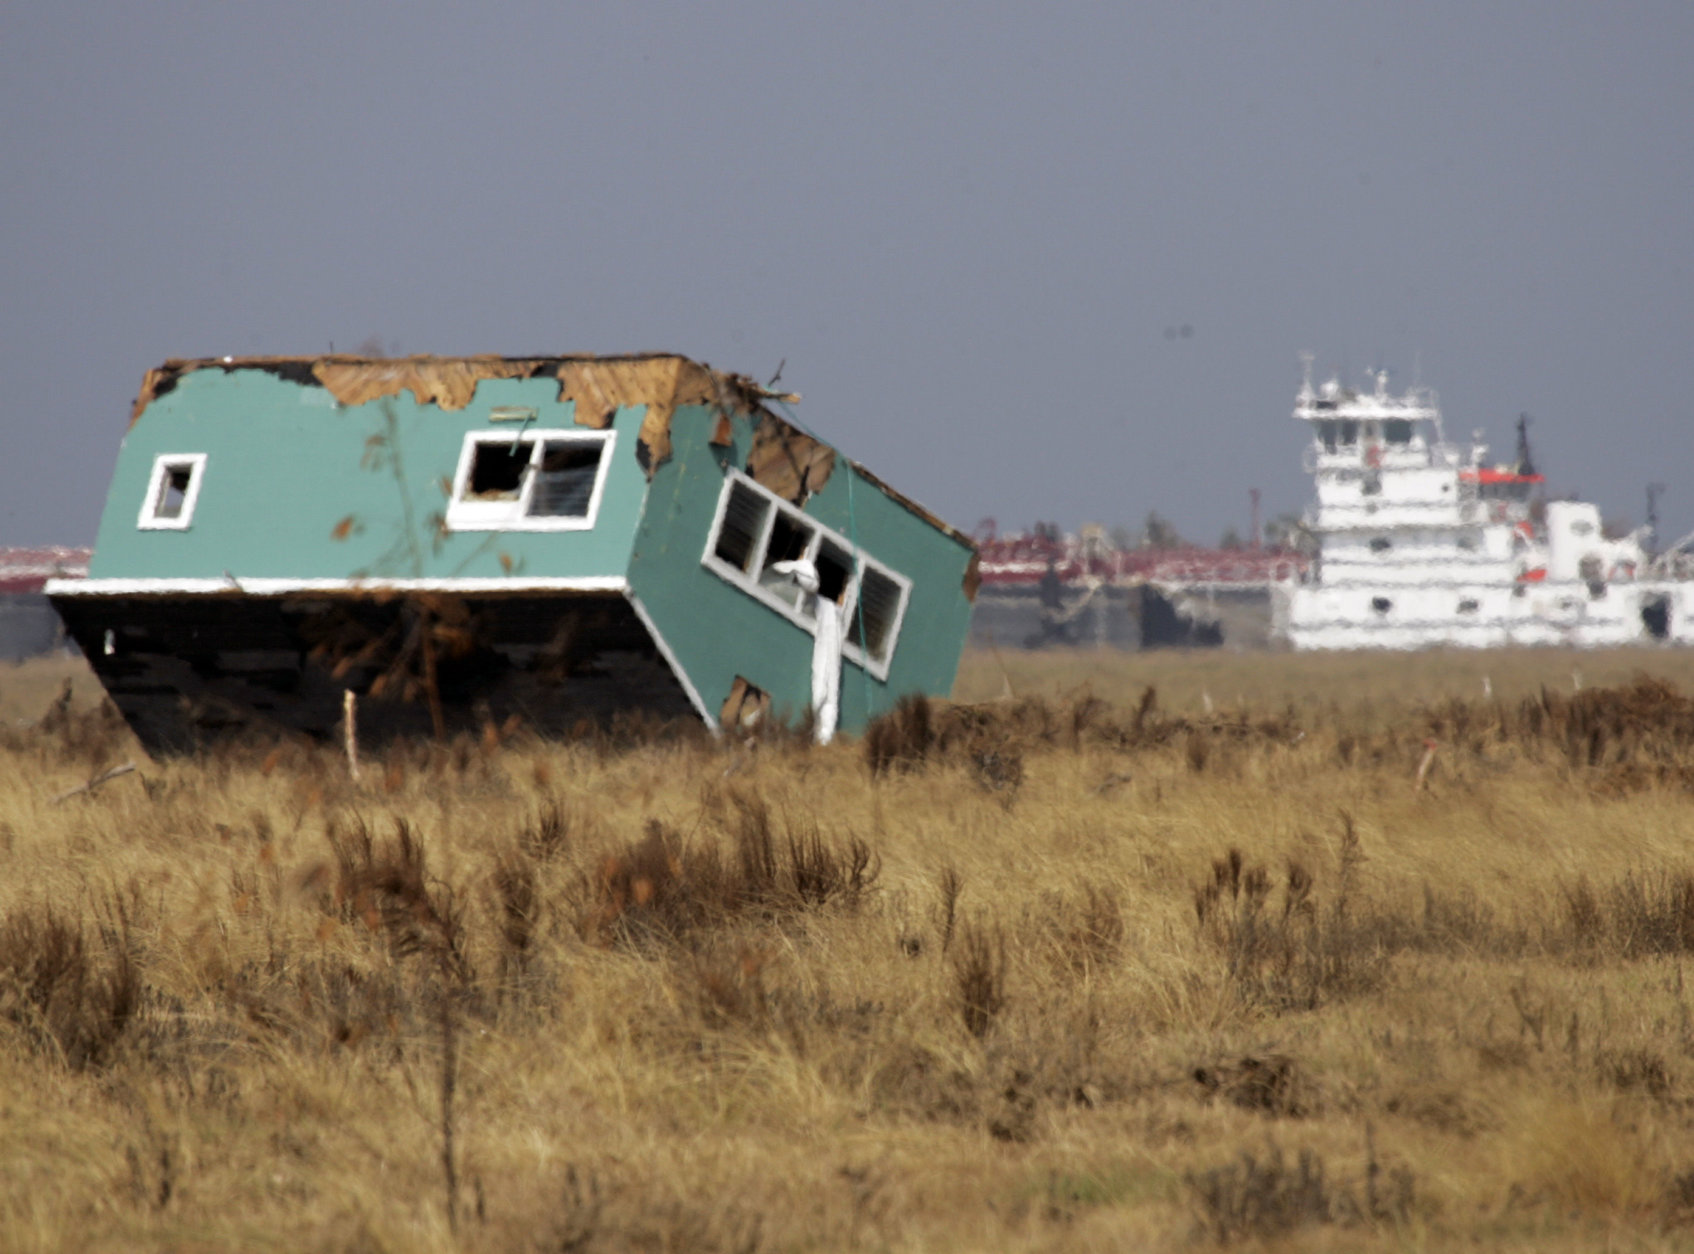 A house sits upside down in a field Friday, Sept. 26, 2008 in Crystal Beach, Texas, nearly two weeks after Hurricane Ike struck the Texas Gulf coast. (AP Photo/Pat Sullivan)